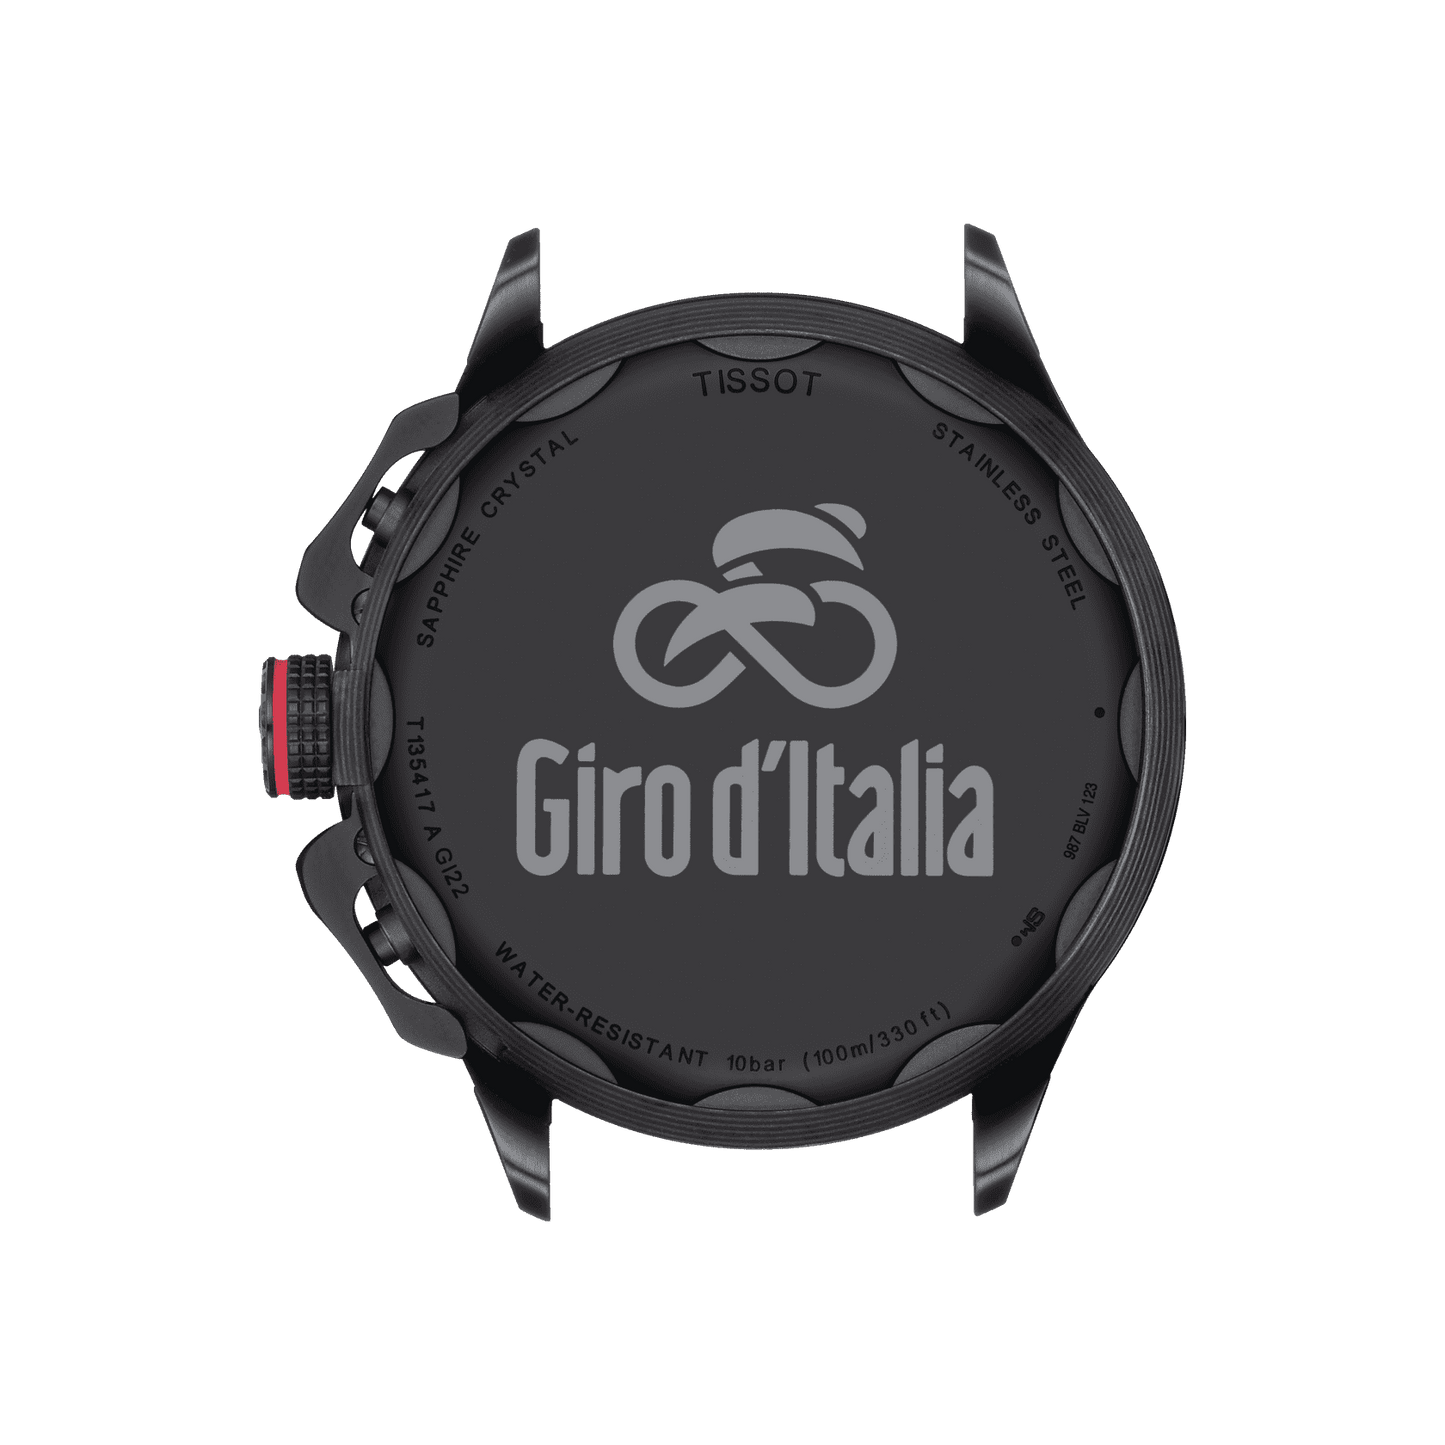 Image 2 of Tissot T-Race Cycling Giro d'Italia  2022 Special Edition